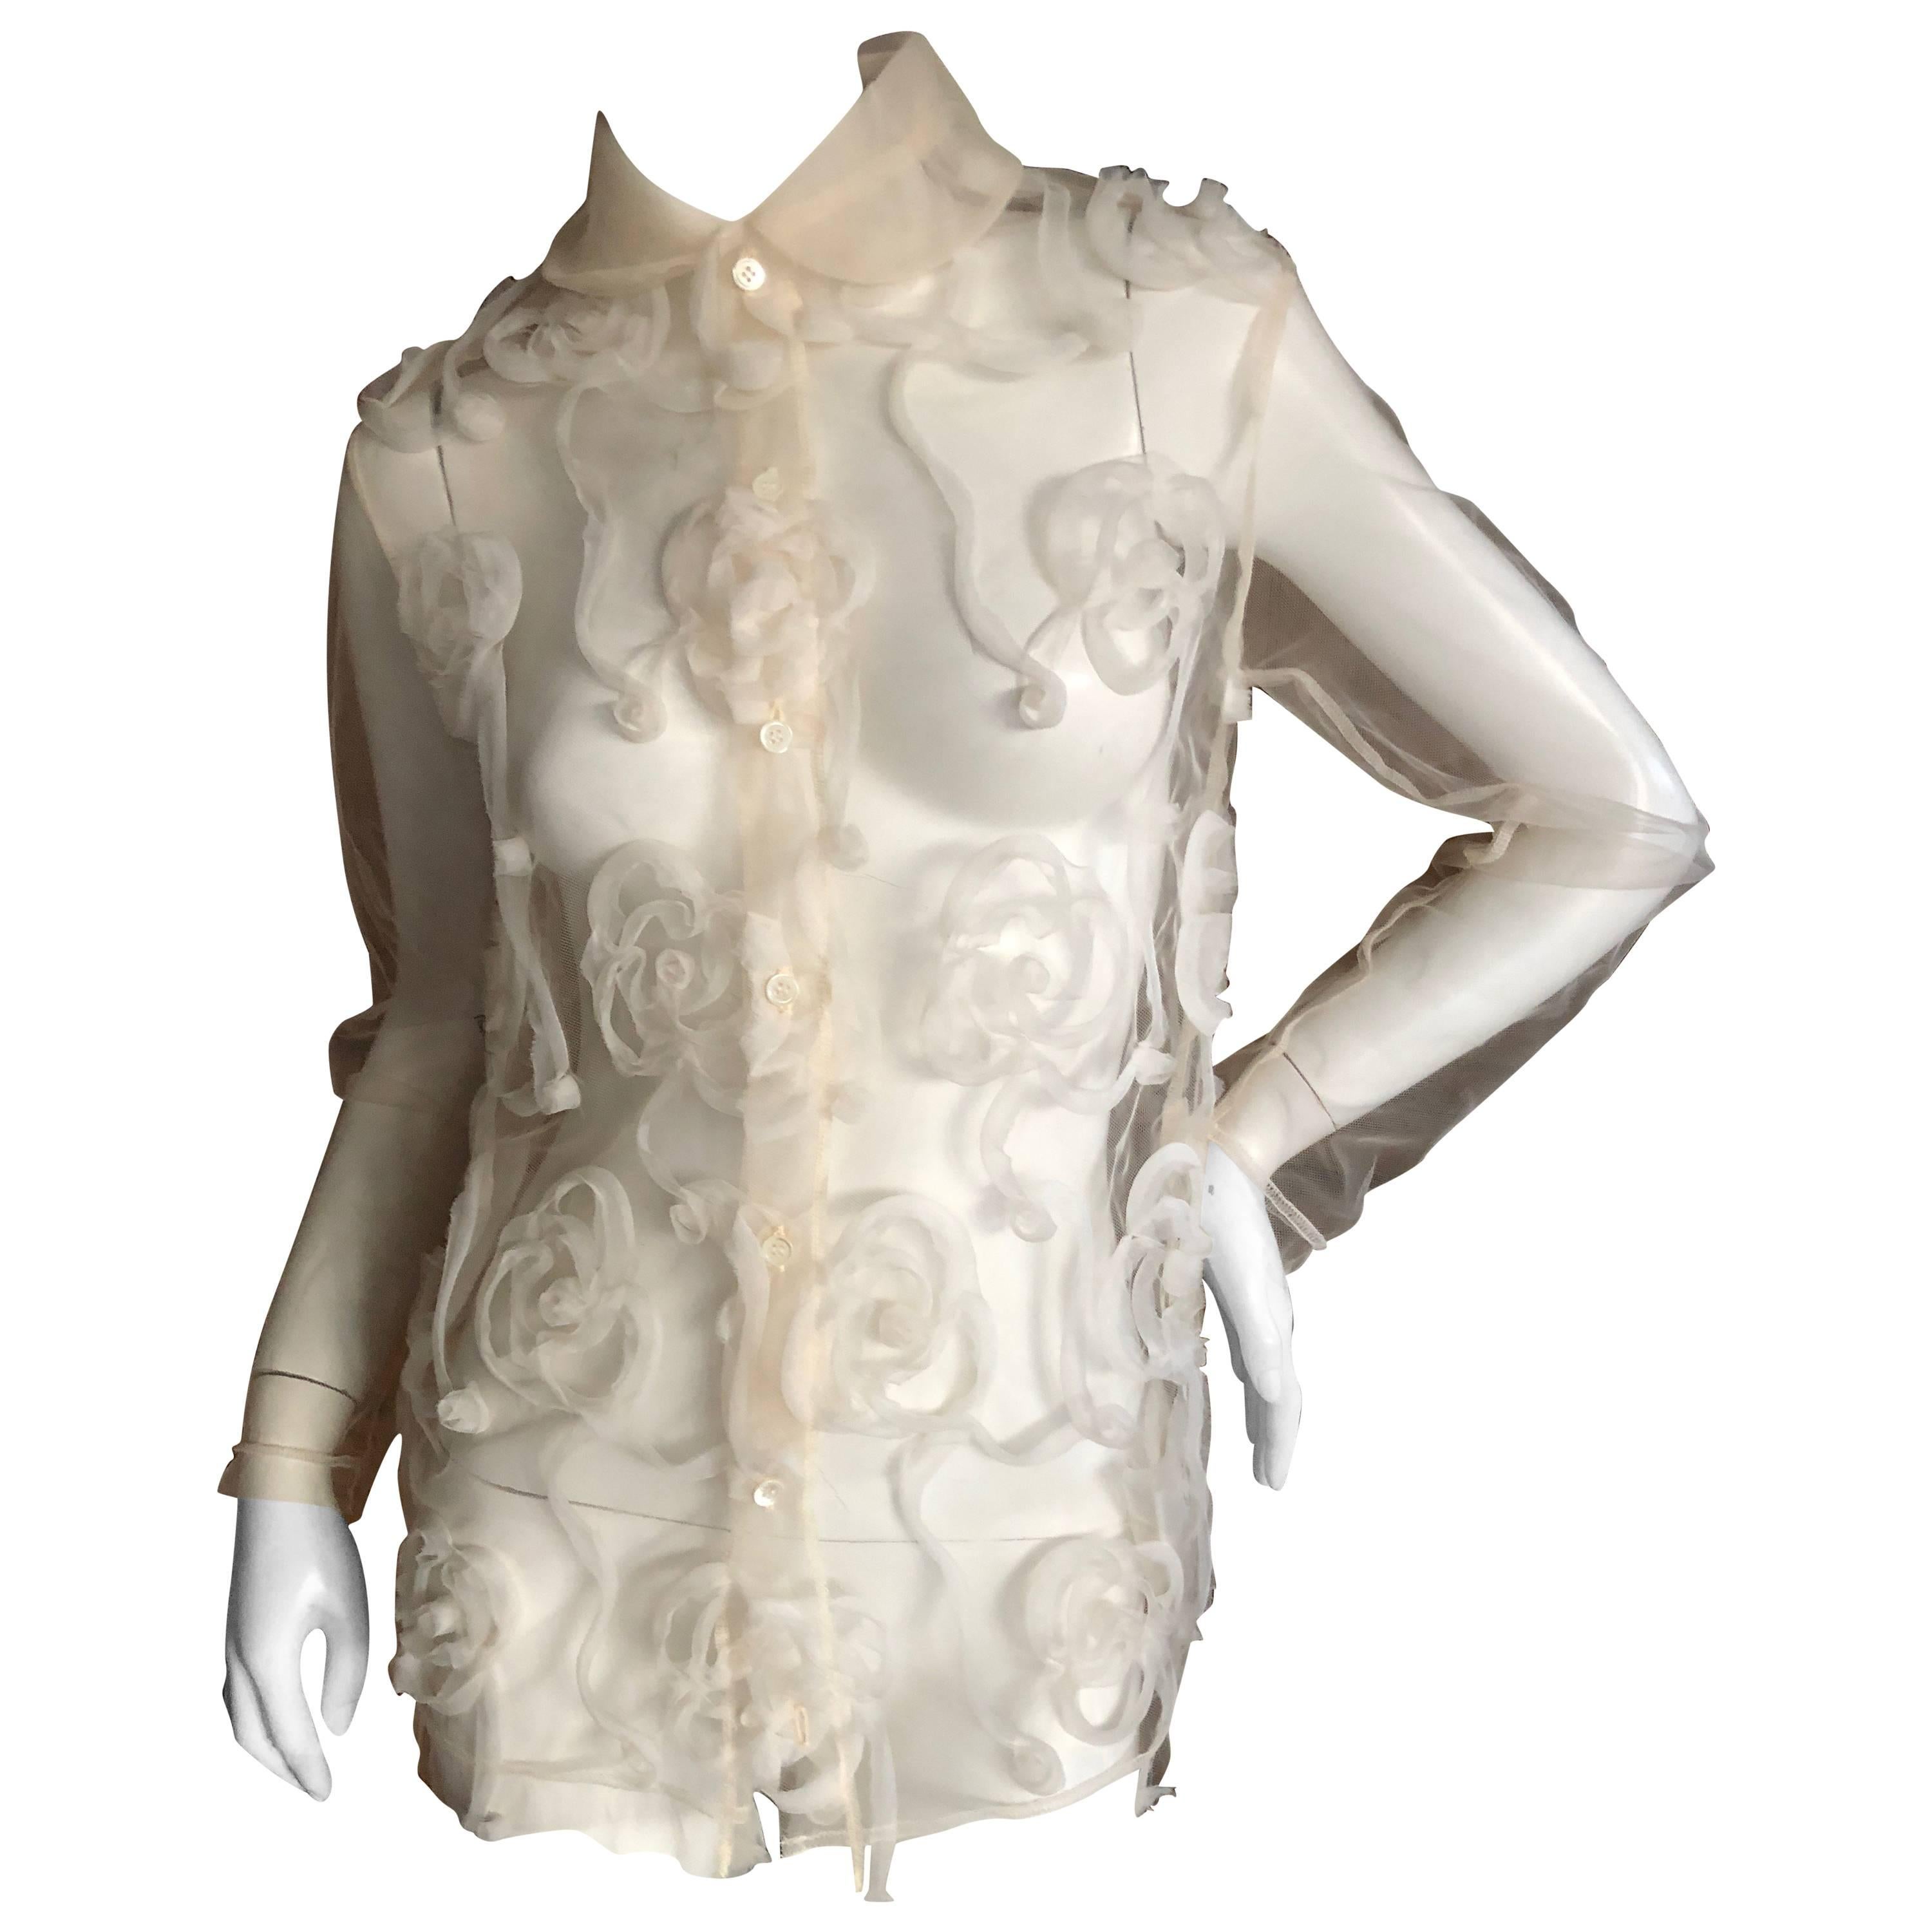 Tricot Comme des Garcons Sheer Blouse with Tulle Overlay Floral Details New Tags For Sale